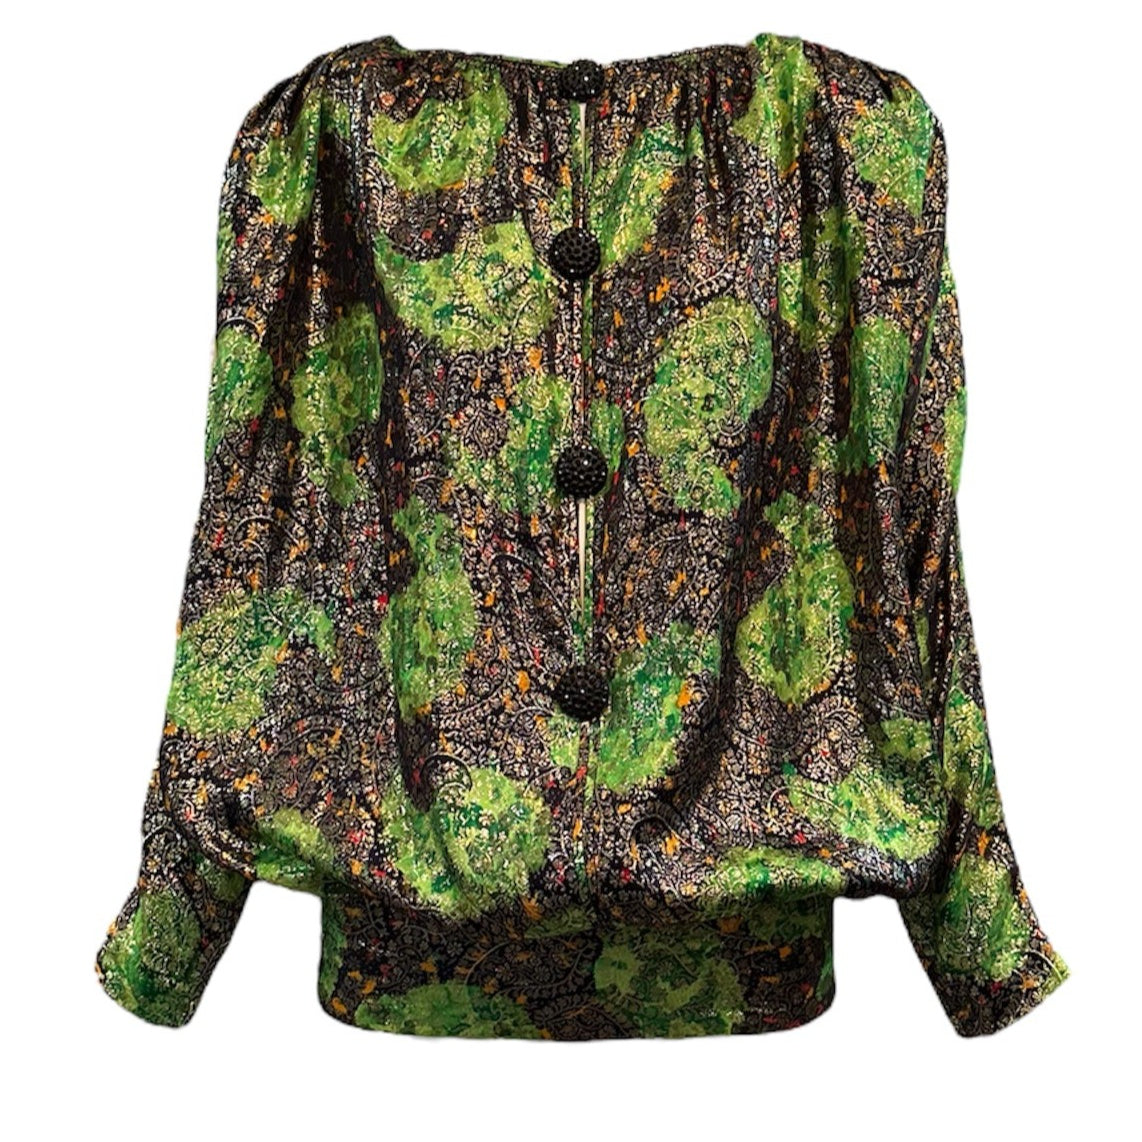 Galanos 80s Acid Green Lame Statement Blouse FRONT 1 of 6